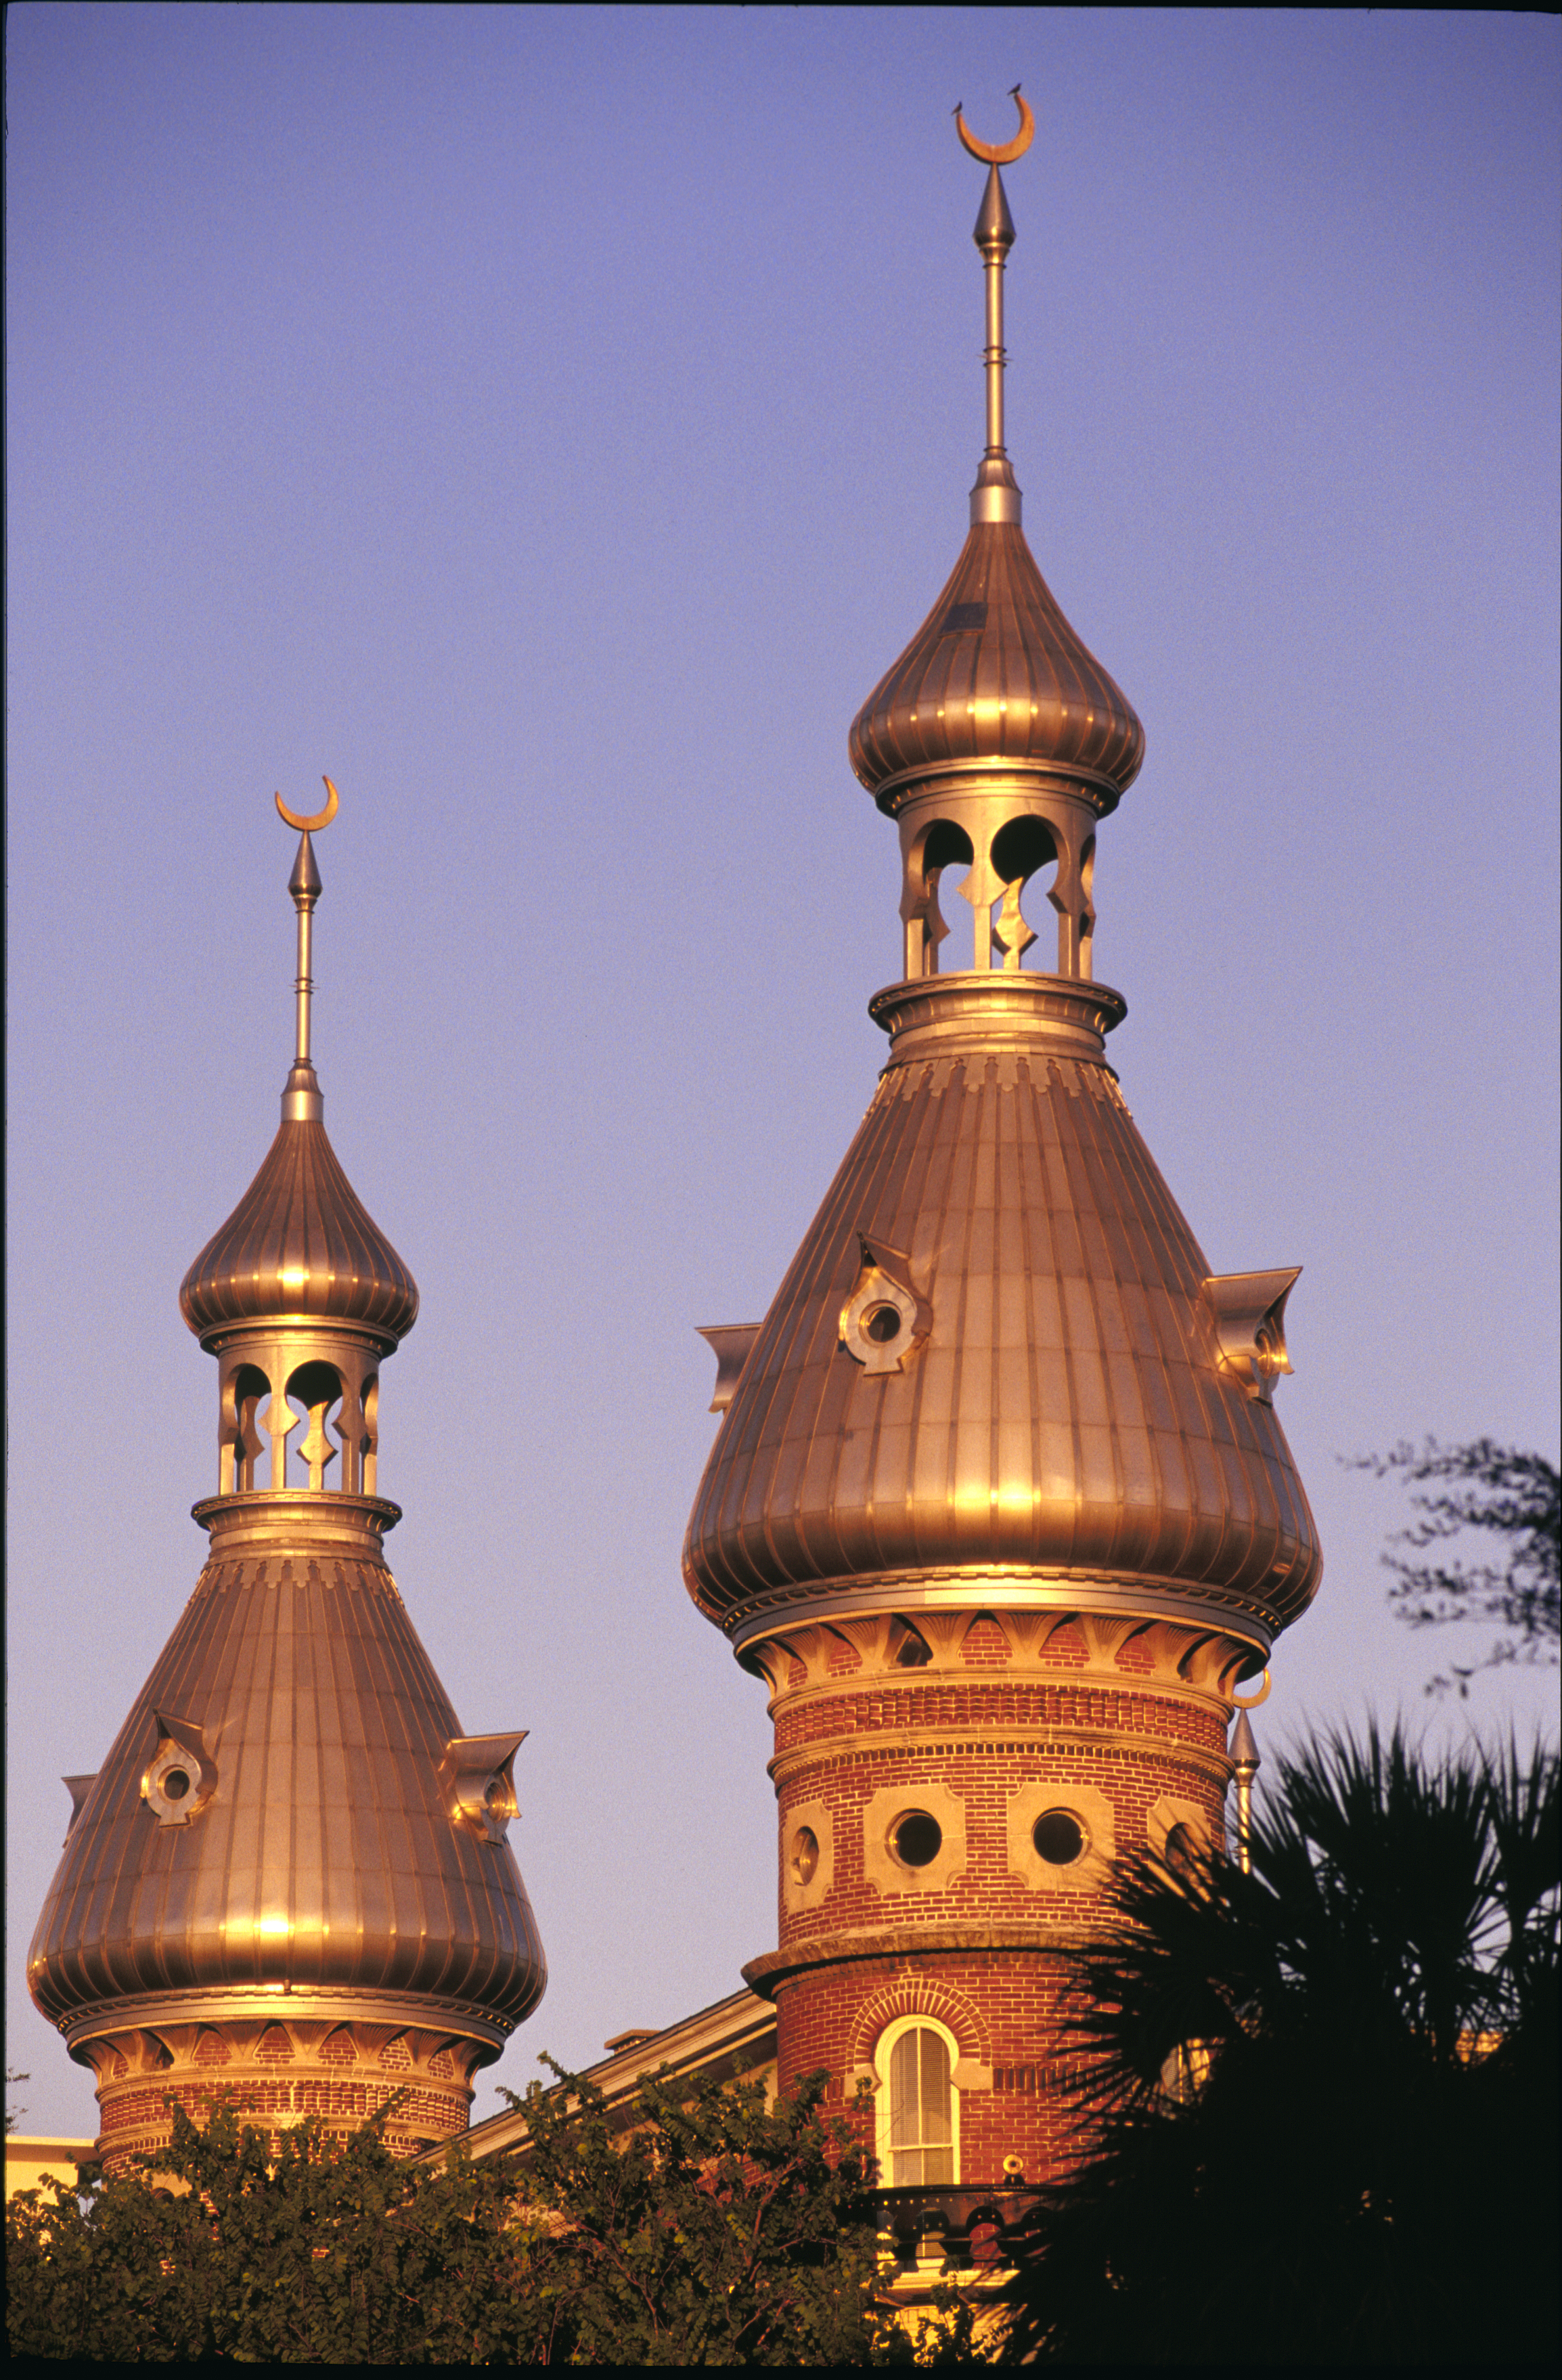 The sun shines on two towers of Plant Hall at the University of Tampa.